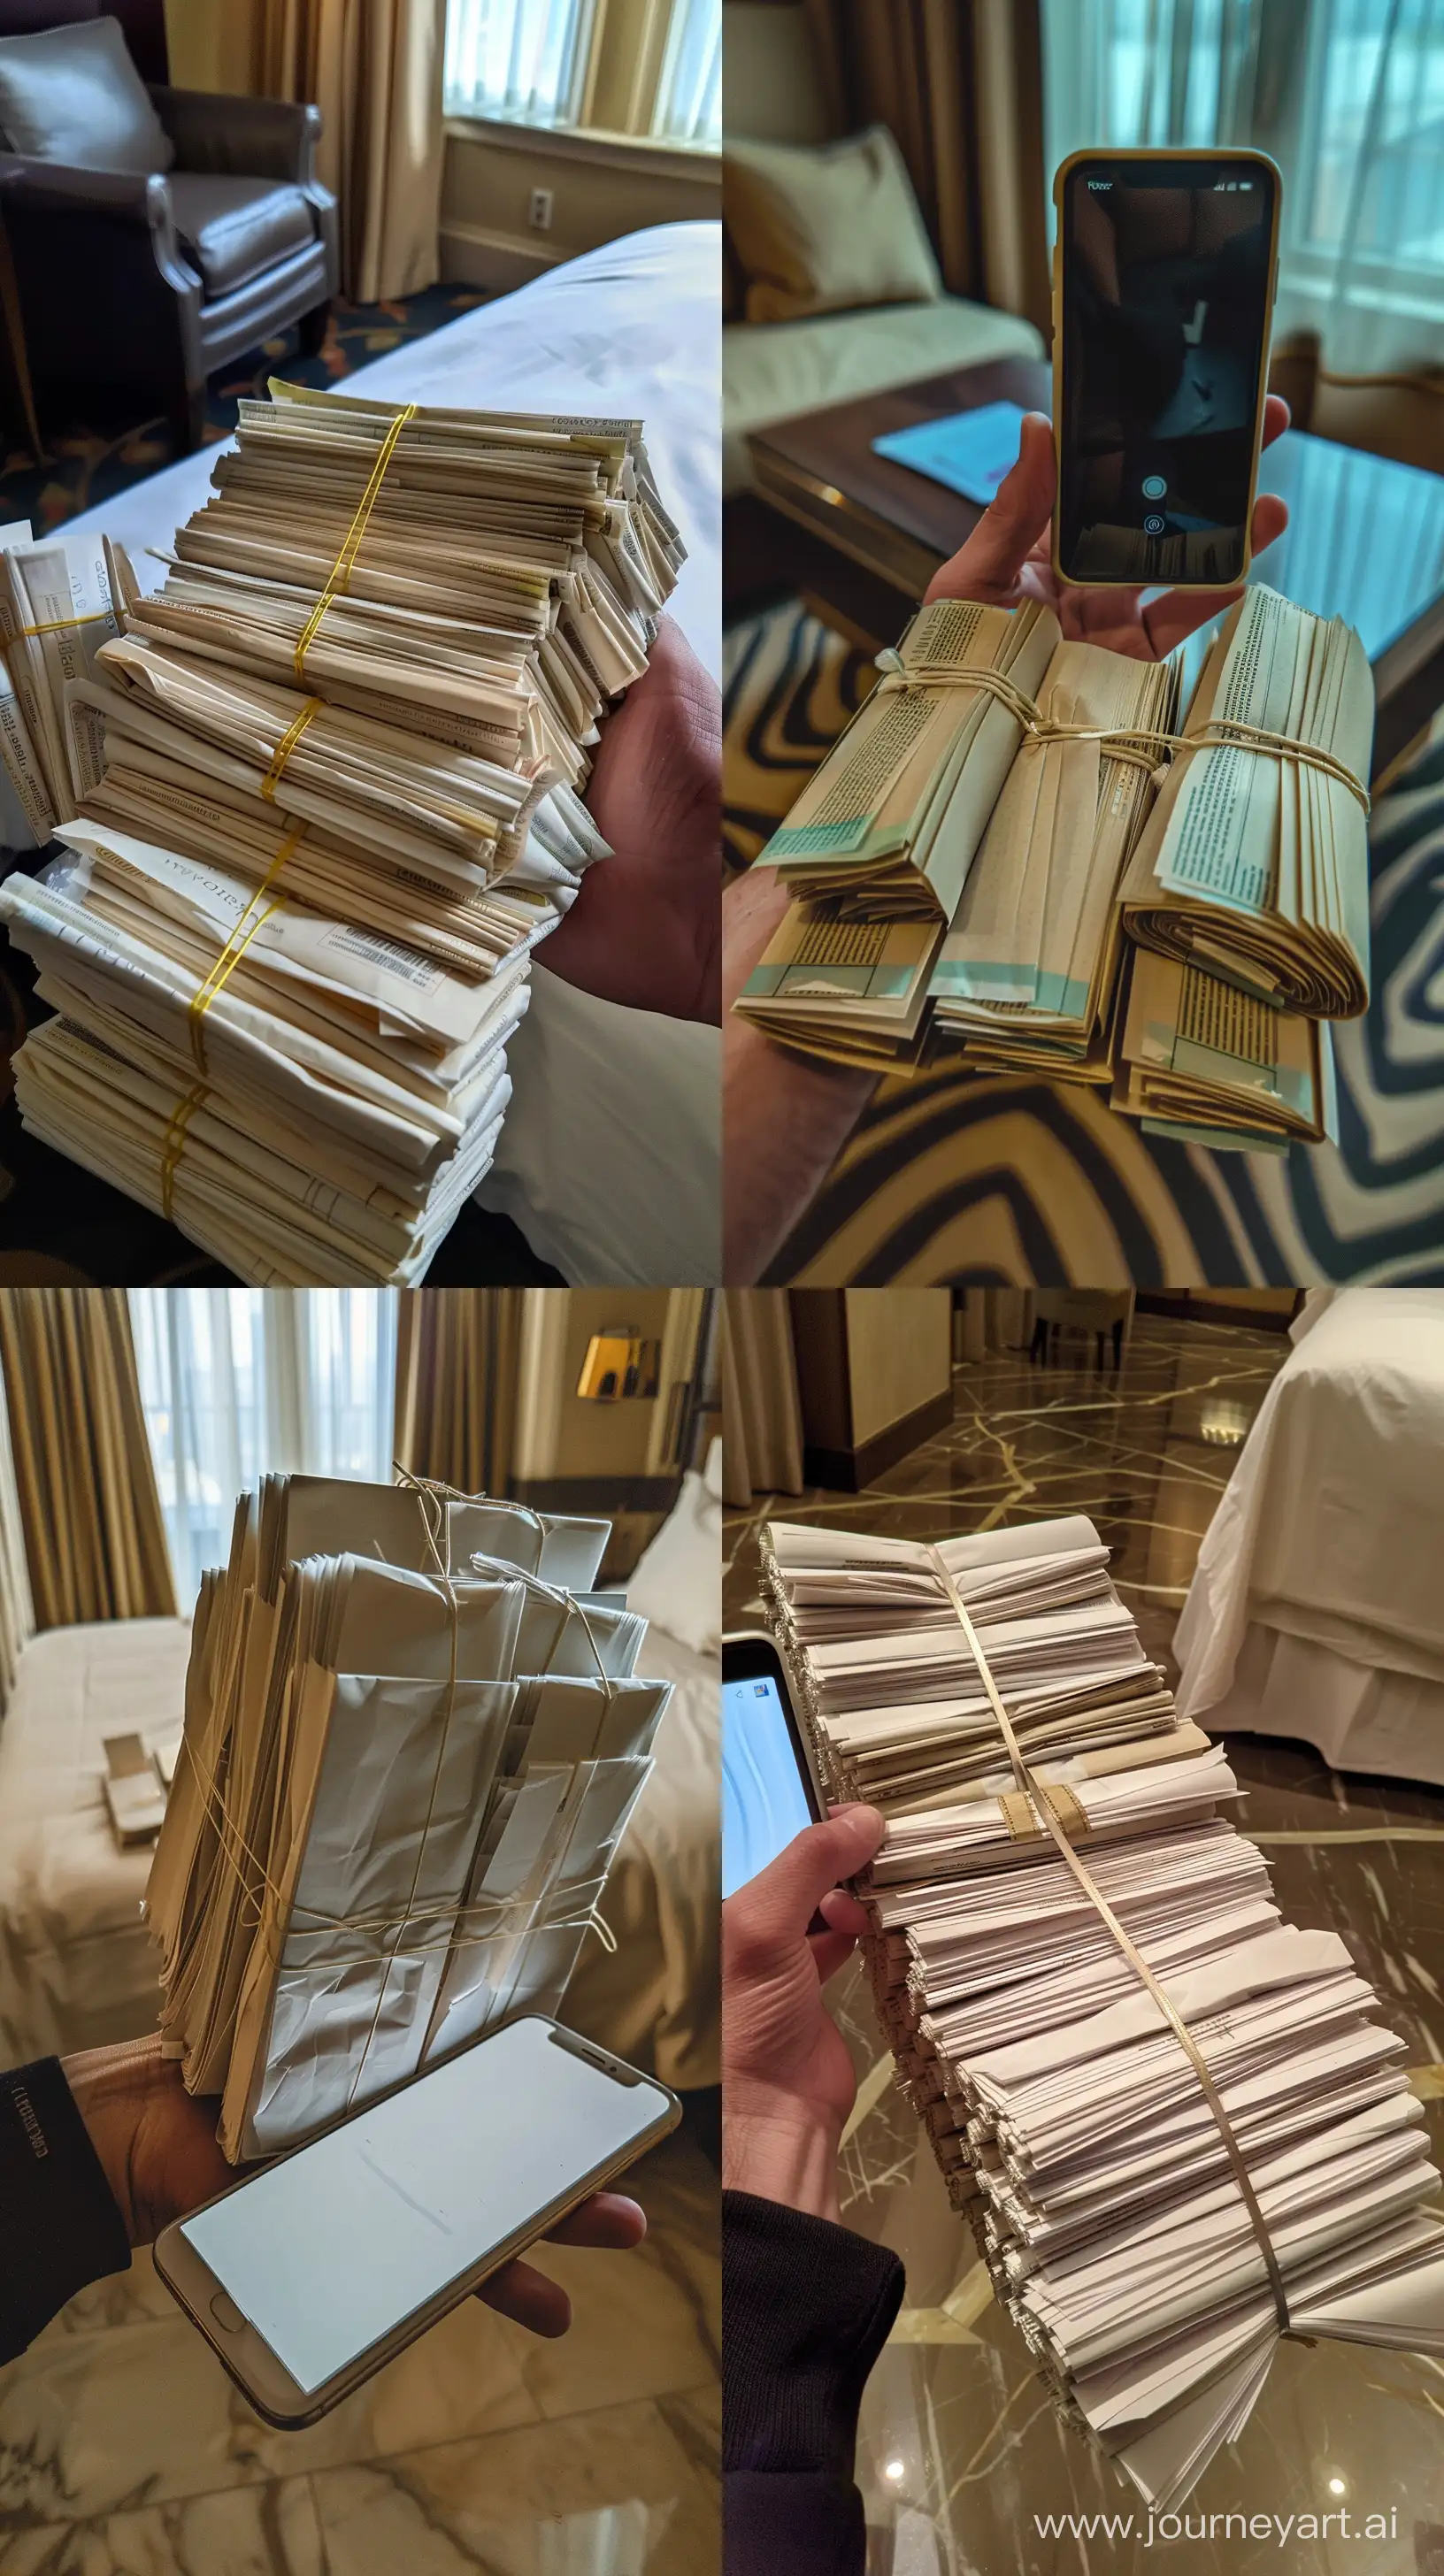 Busy-Business-Traveler-Organizing-50-Bundles-of-Paper-in-Hotel-Room